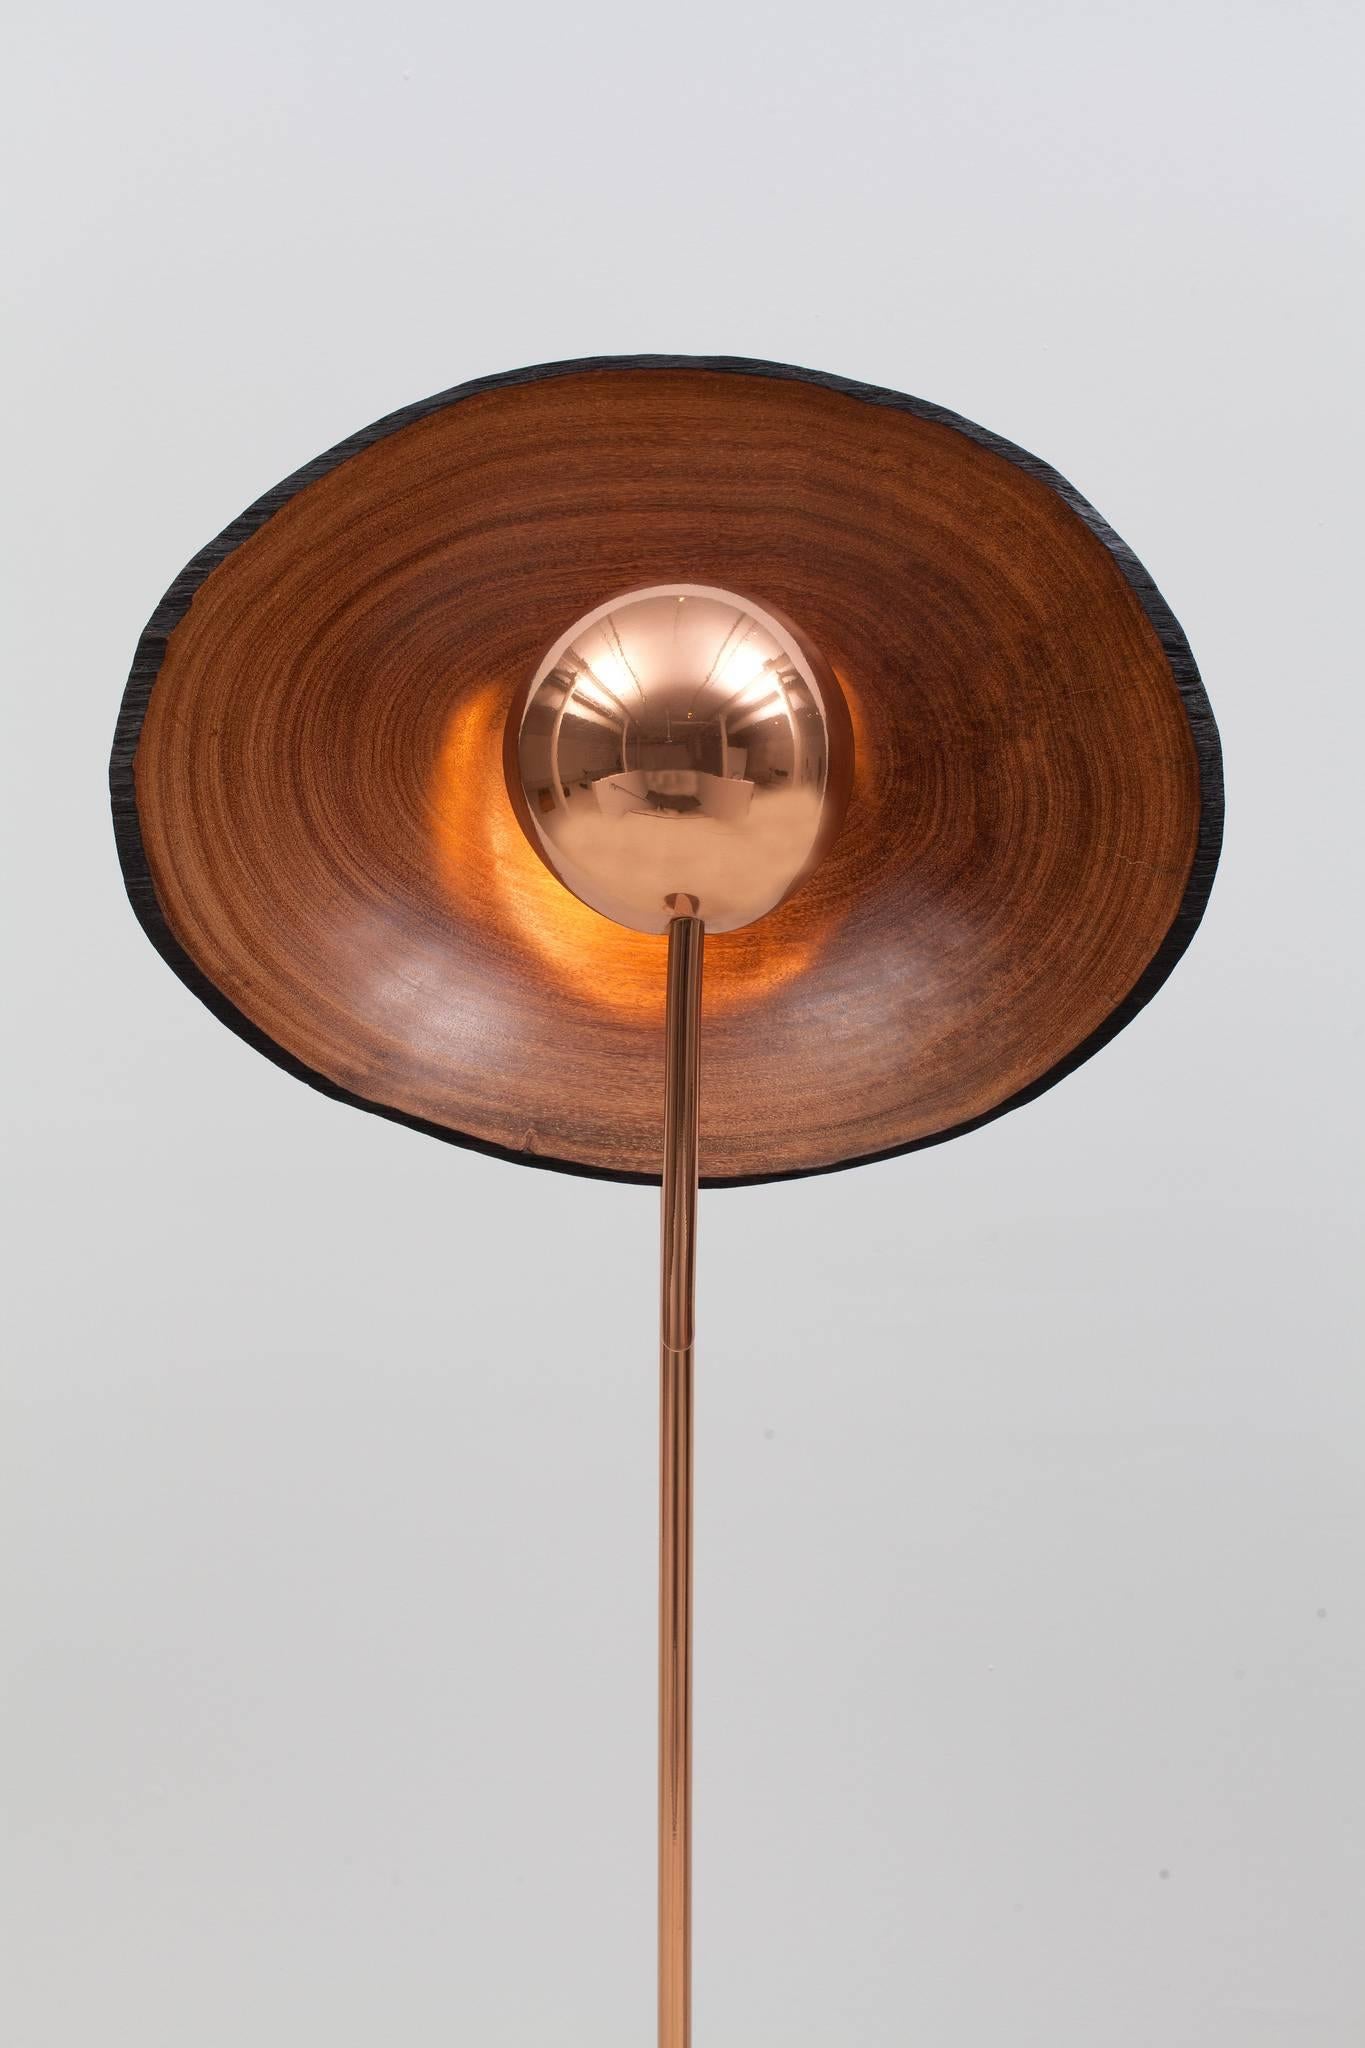 The Cantante floor lighting by Brazilian designer Claudia Moreira Salles is made from fallen native Brazilian tree trunks, every piece is one-of-a-kind. The light reflected on the wood´s surface radiates a soft, warm glow.

Metal: Copper finish